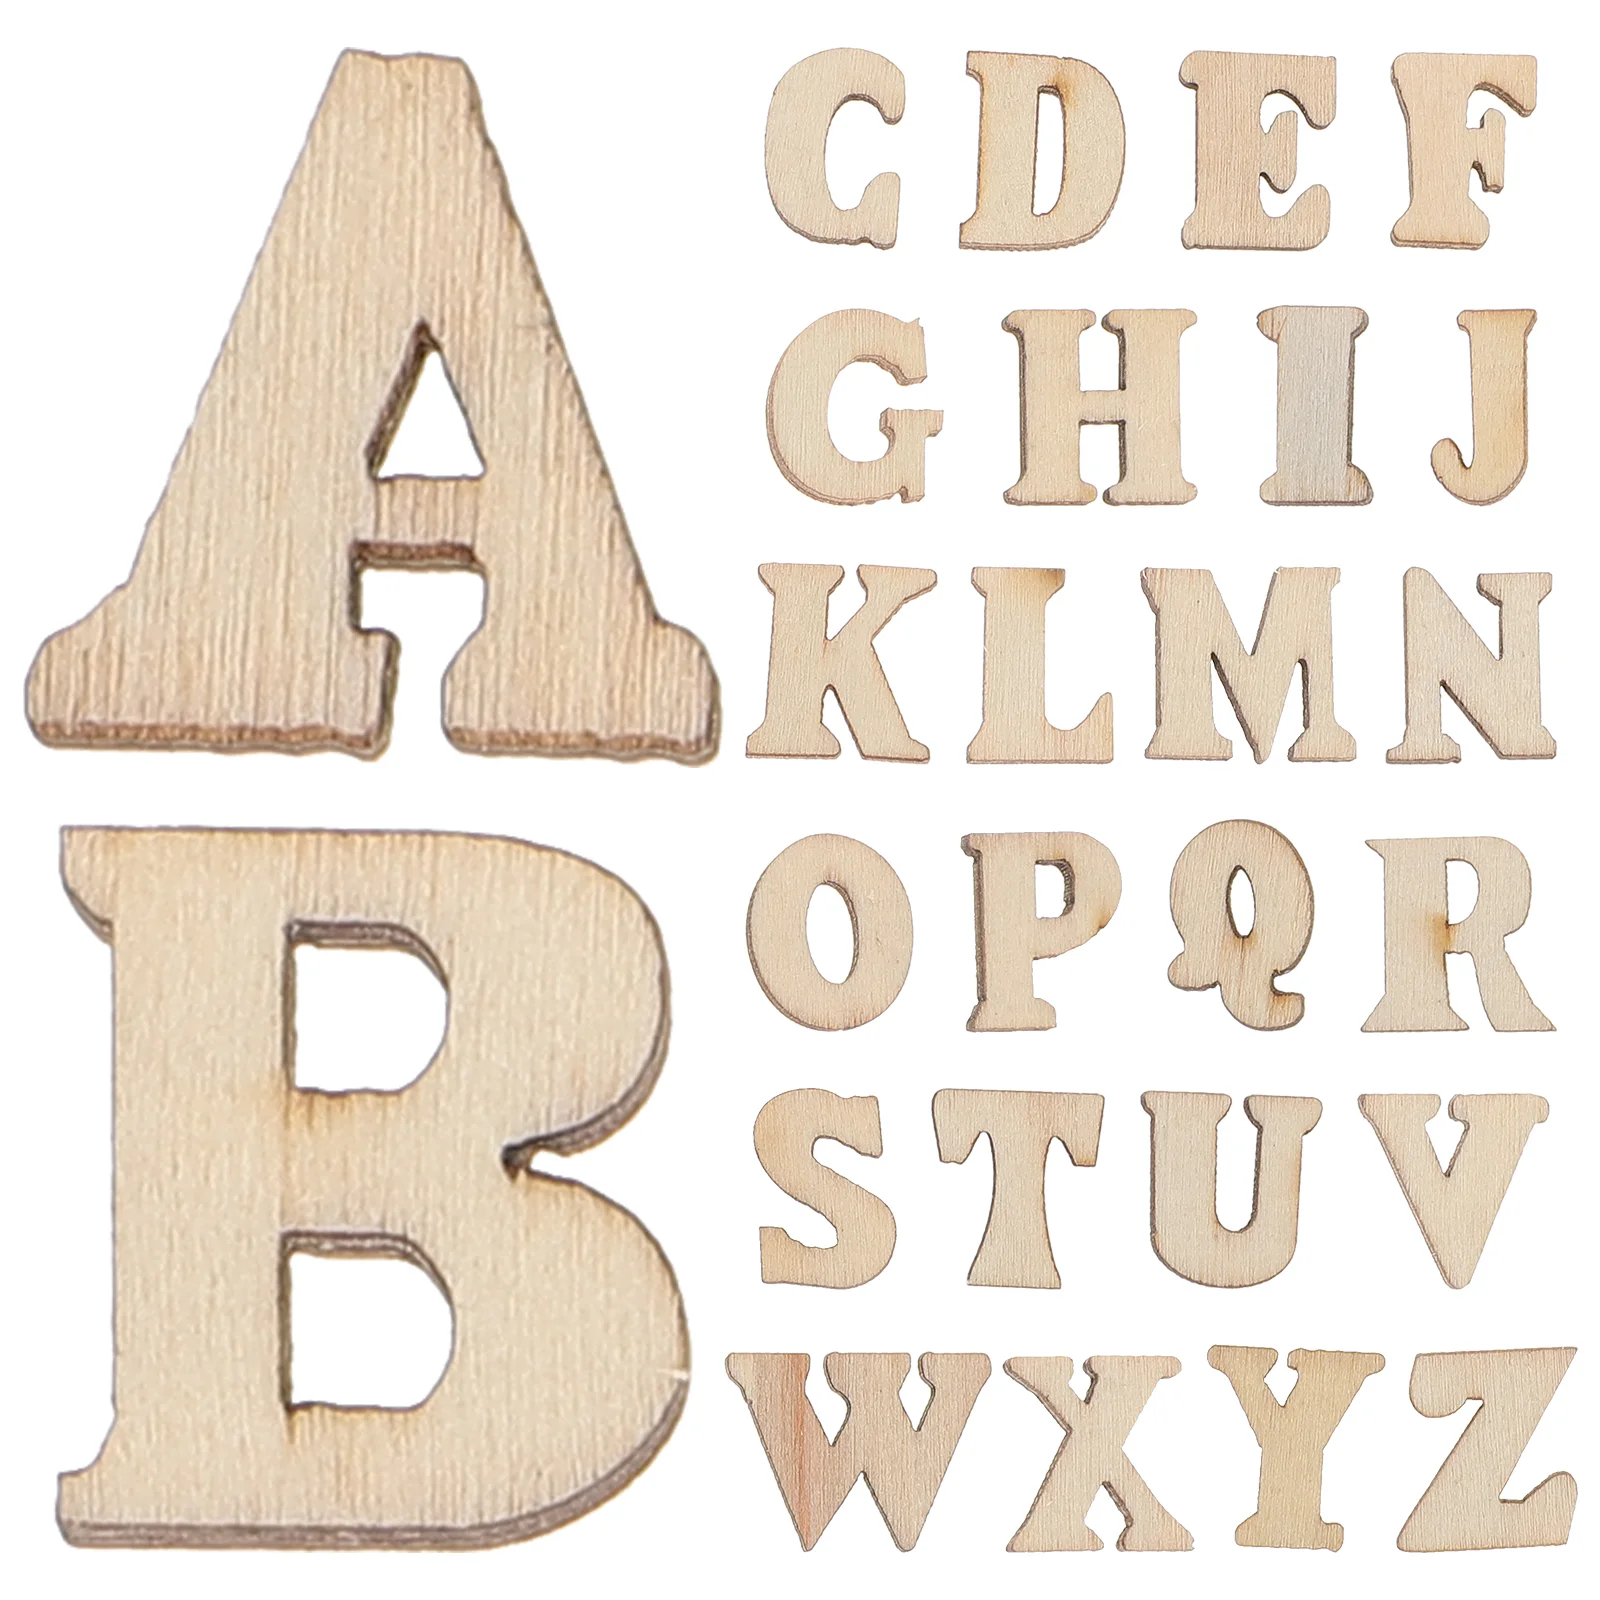 

Wooden Letters Wood Slice Crafts Craft Alphabet Letter Embellishments Unfinished Christmas Material Diy Mini Decor Cutouts